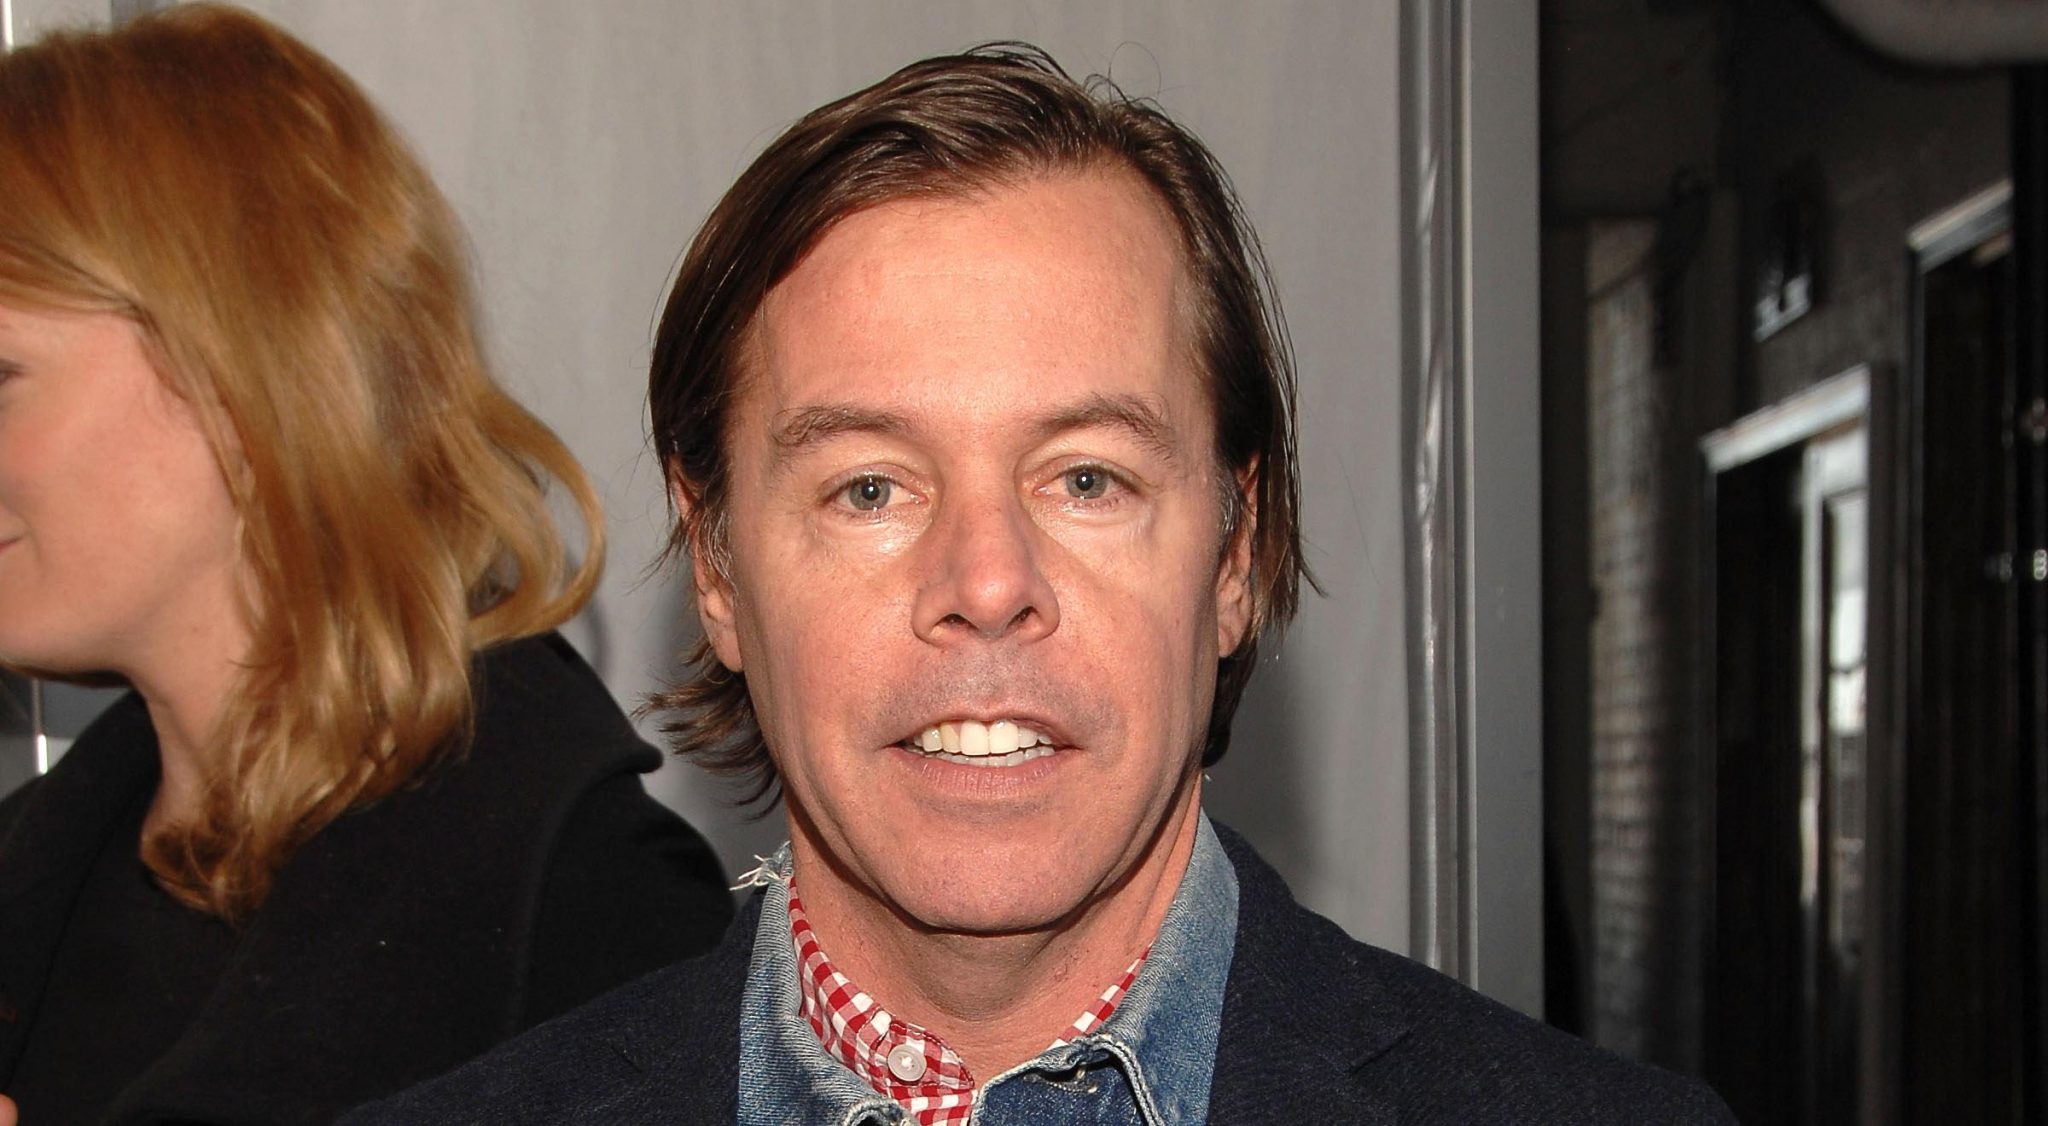 Andy Spade's Net Worth in 2018 Is Estimated at $200.0 Million